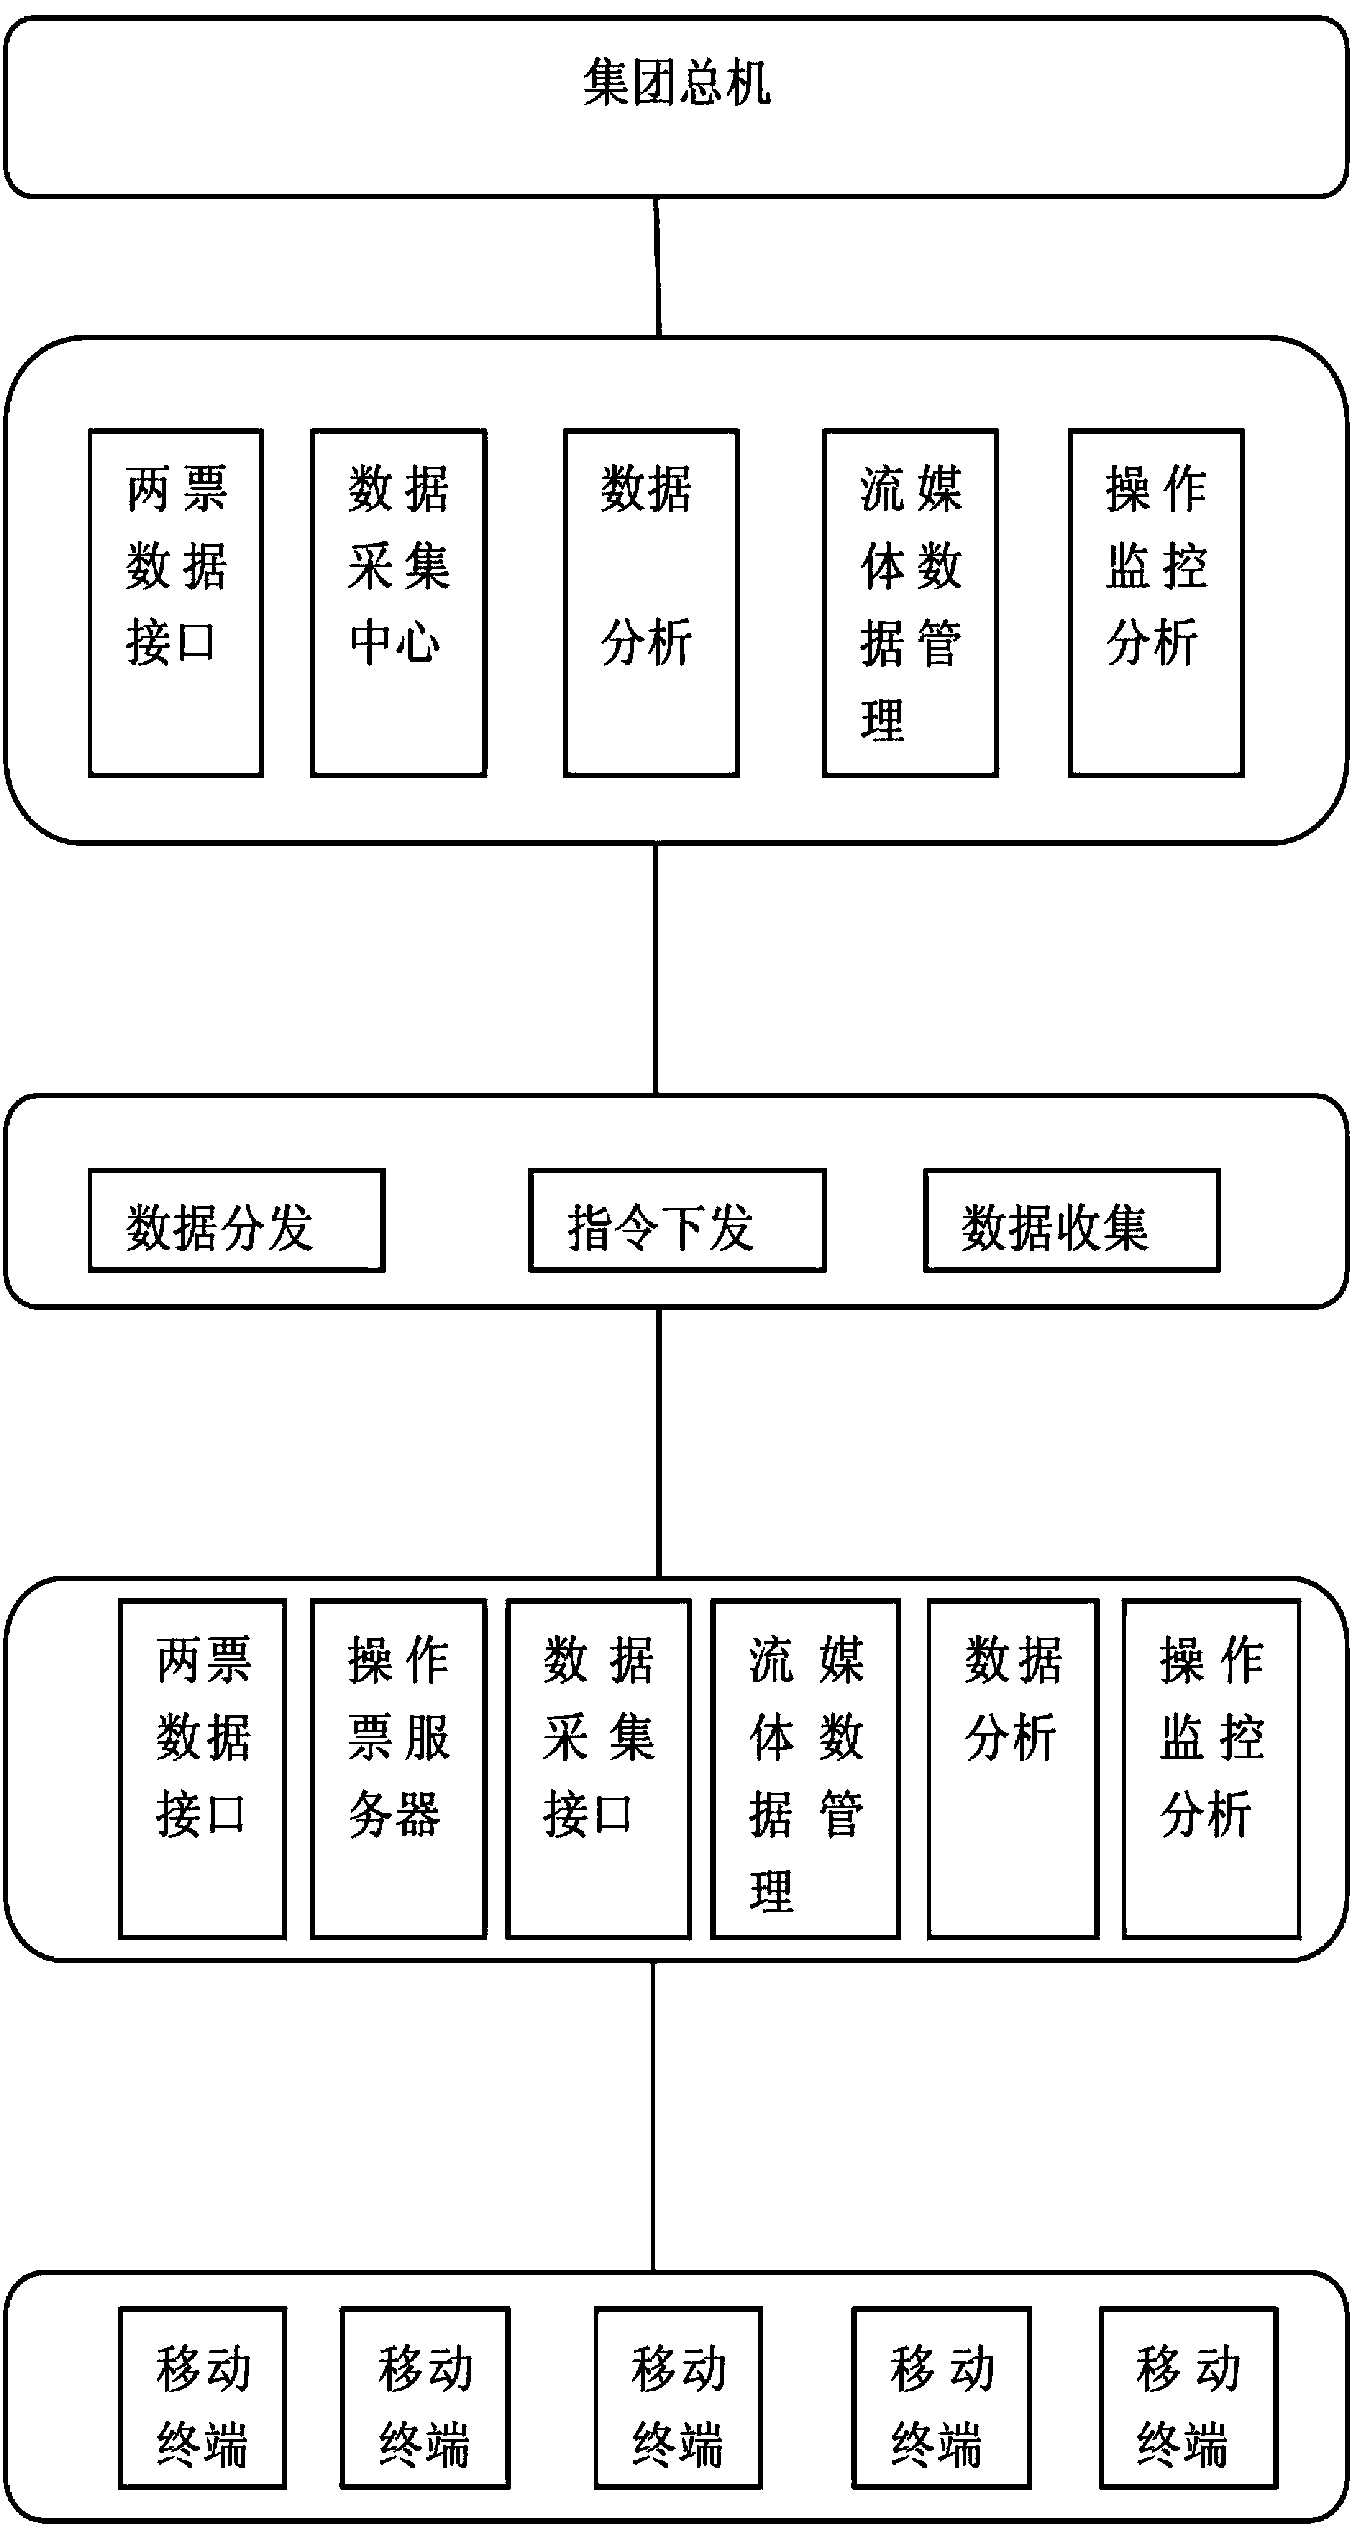 Electronic mobile operation order system